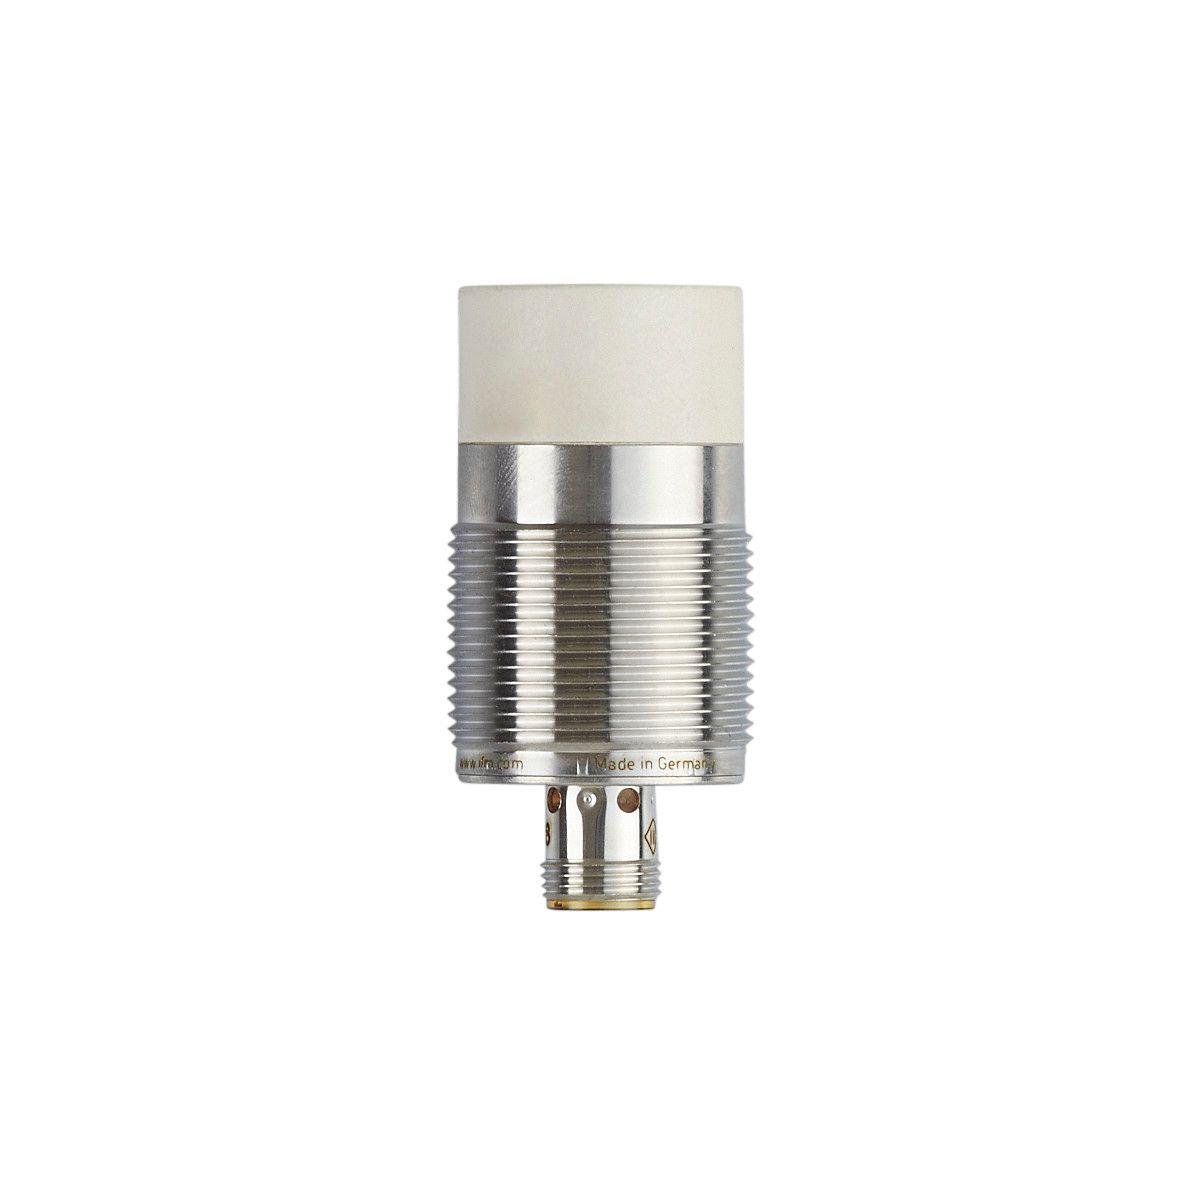 ifm Electronic IIS268 Inductive sensor, Suitable for industrial, mobile, cooling and lubricating applications, Electrical design: PNP, Output function: normally open, Sensing range [mm]: 30, Housing: Threaded type, Dimensions [mm]: M30 x 1.5 / L = 60, System: gold-plated conta